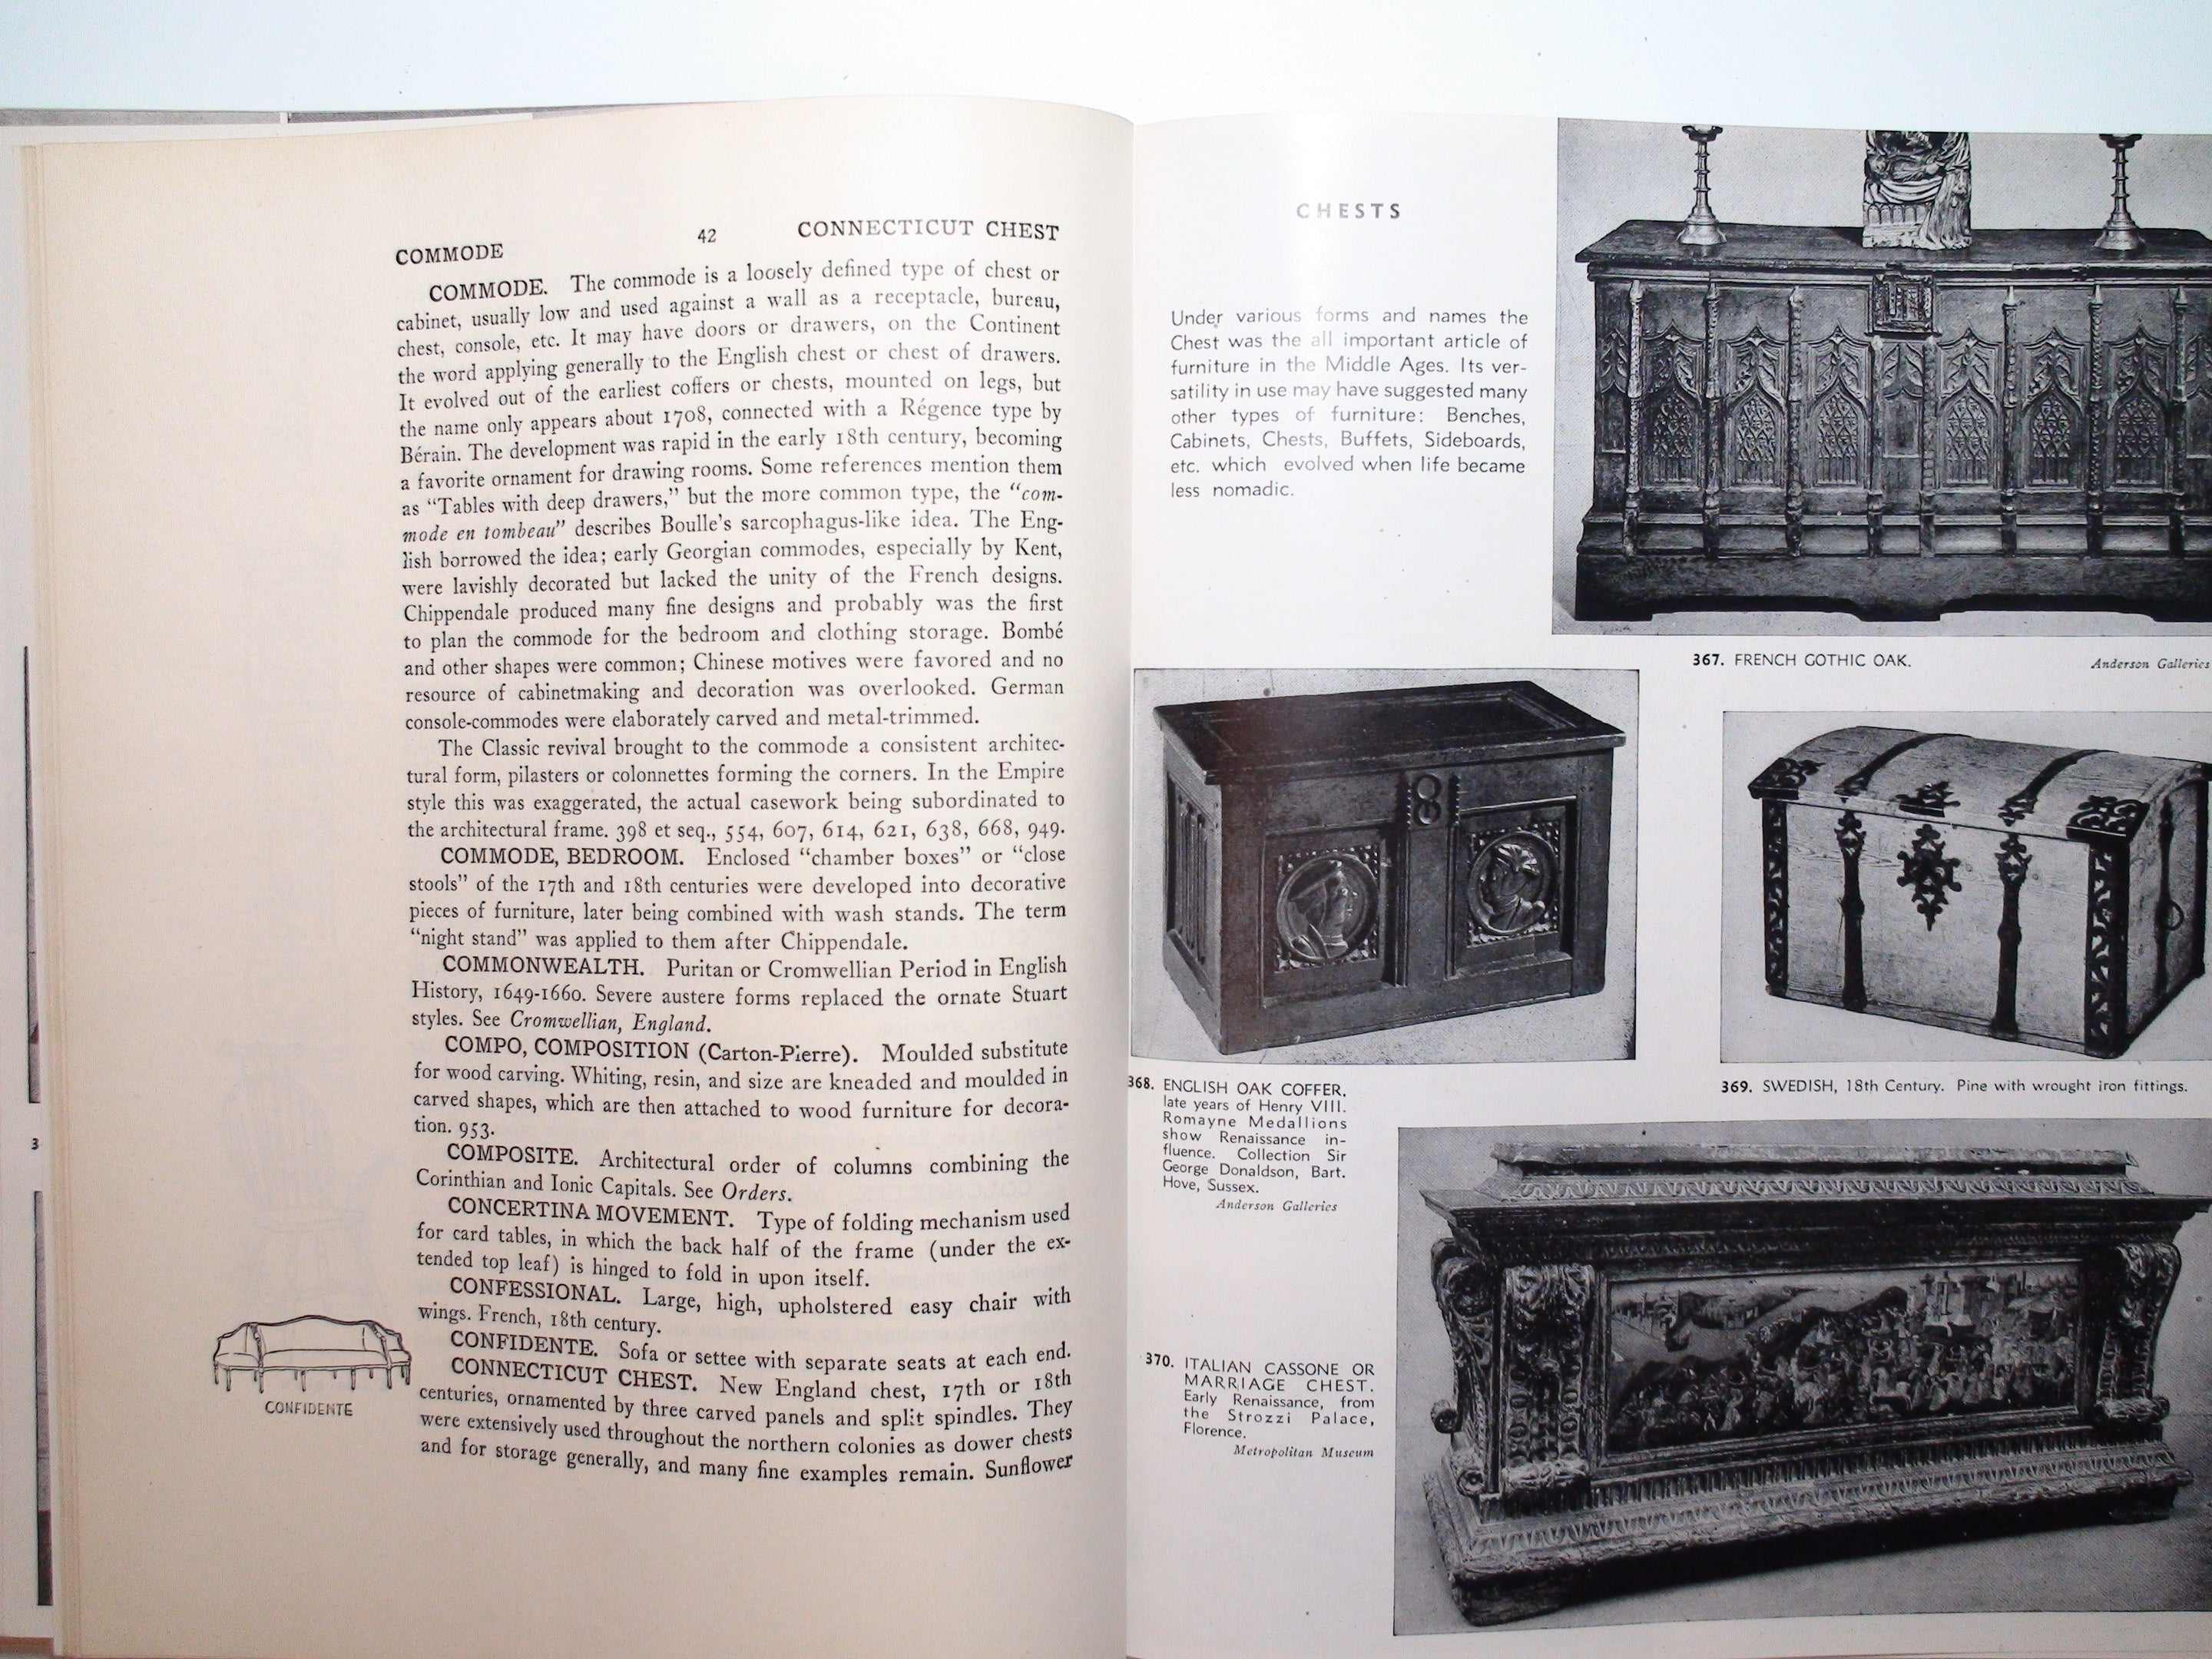 The Encyclopedia of Furniture by Joseph Aronson, With 1,115 Illustrations, 1948